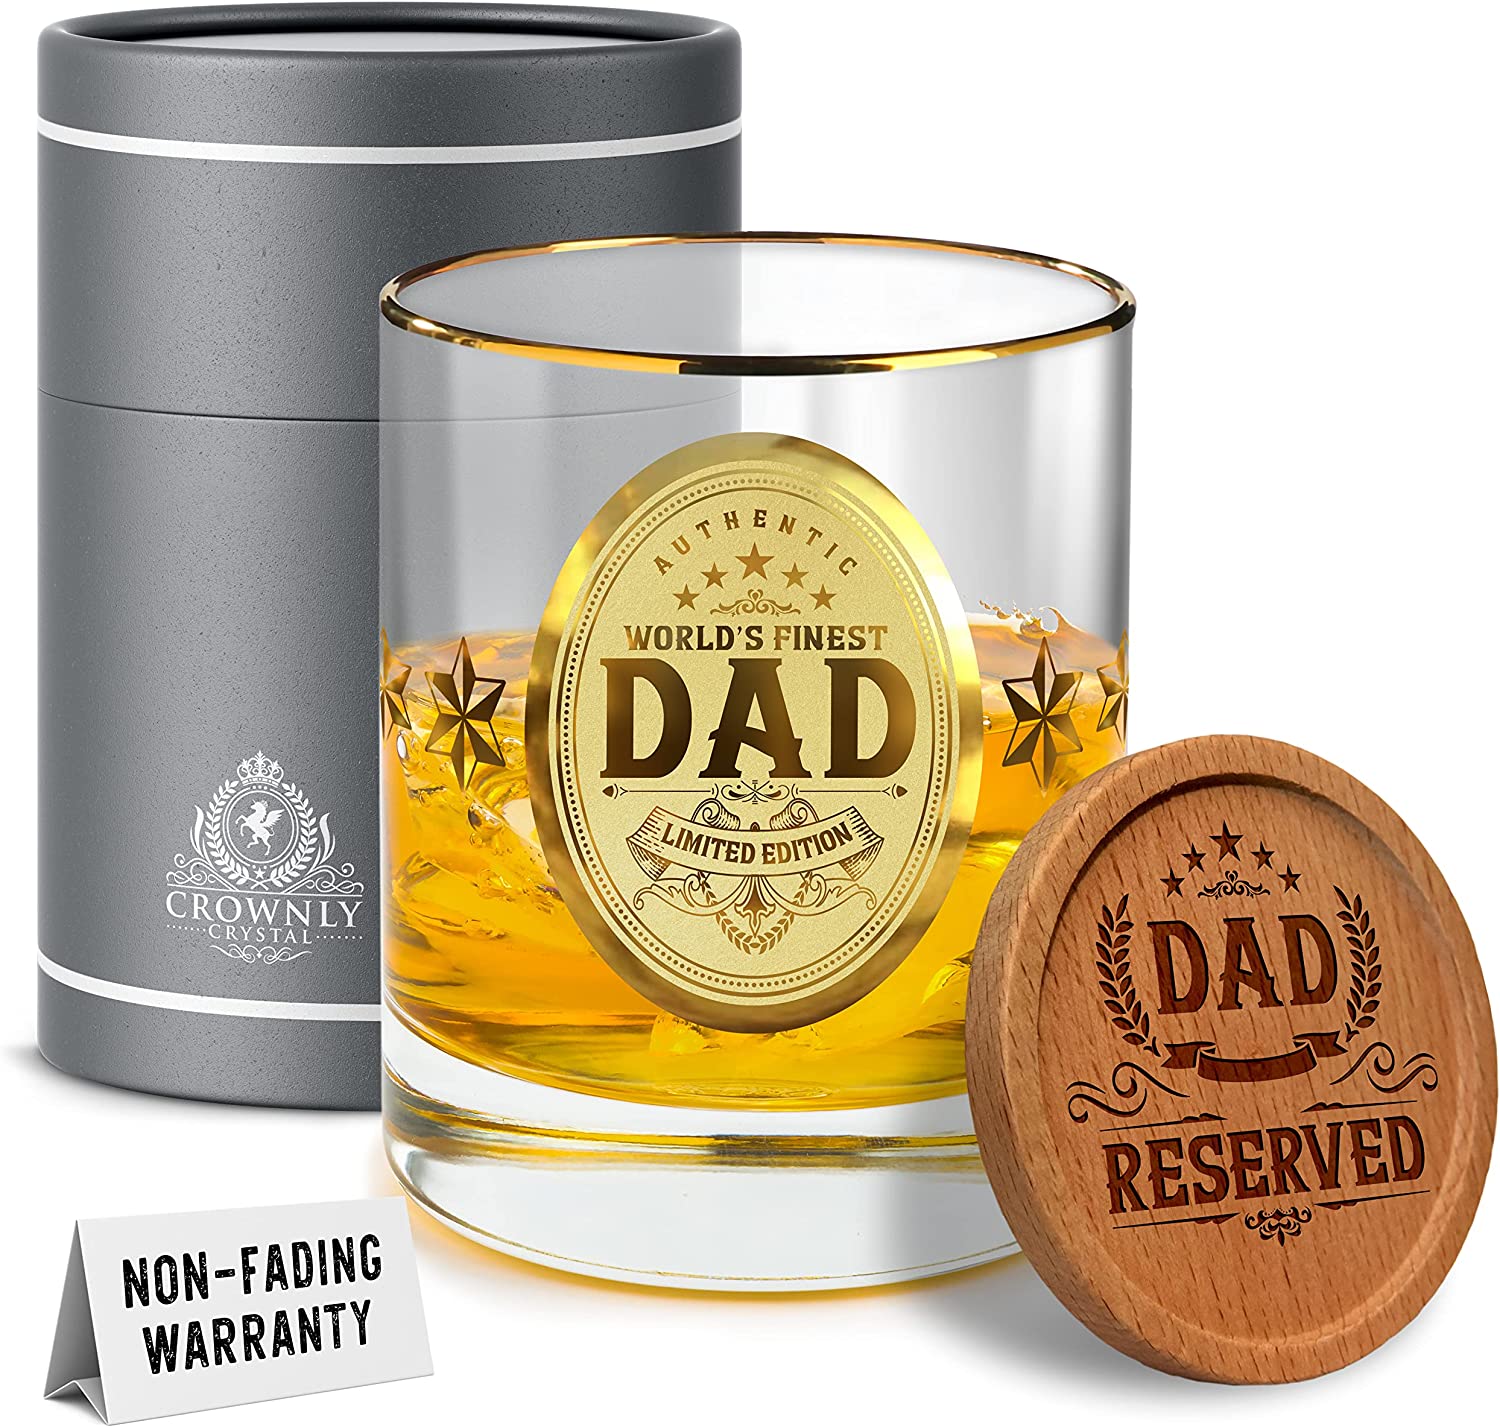 dadss vintage glasswear fathers day